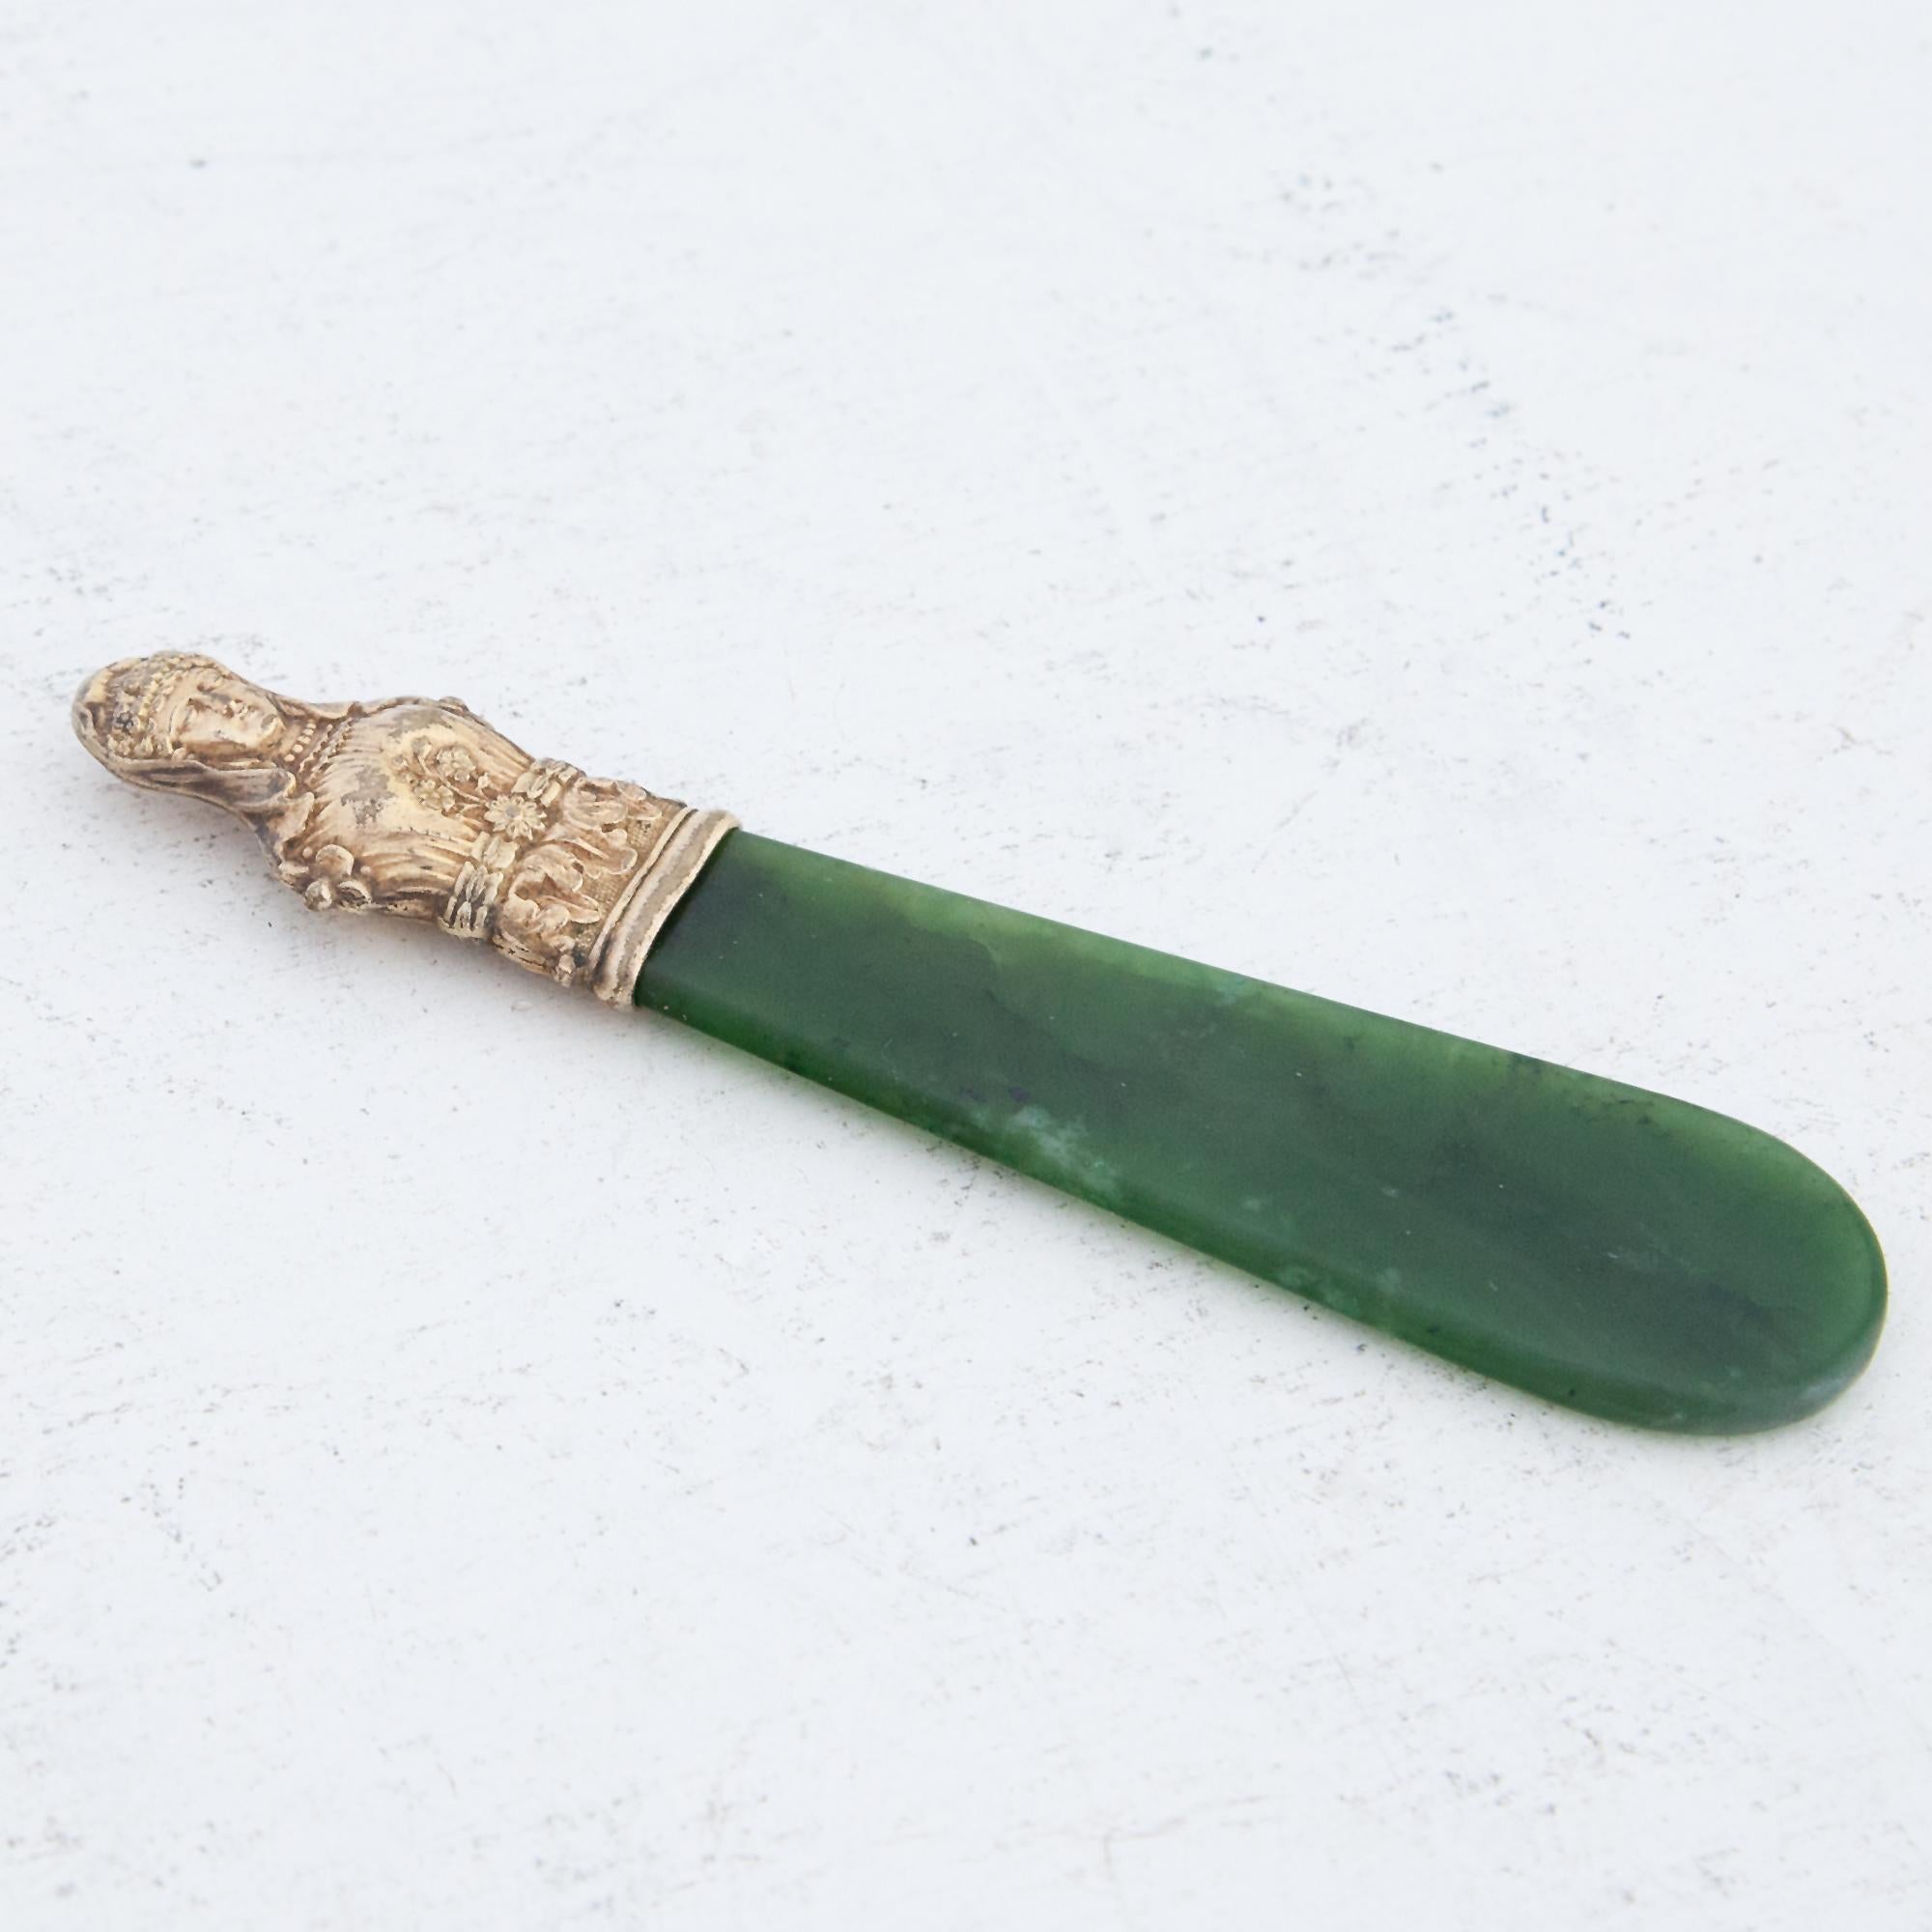 Small caviar knife with green nephrite scabbard and gilded handle.